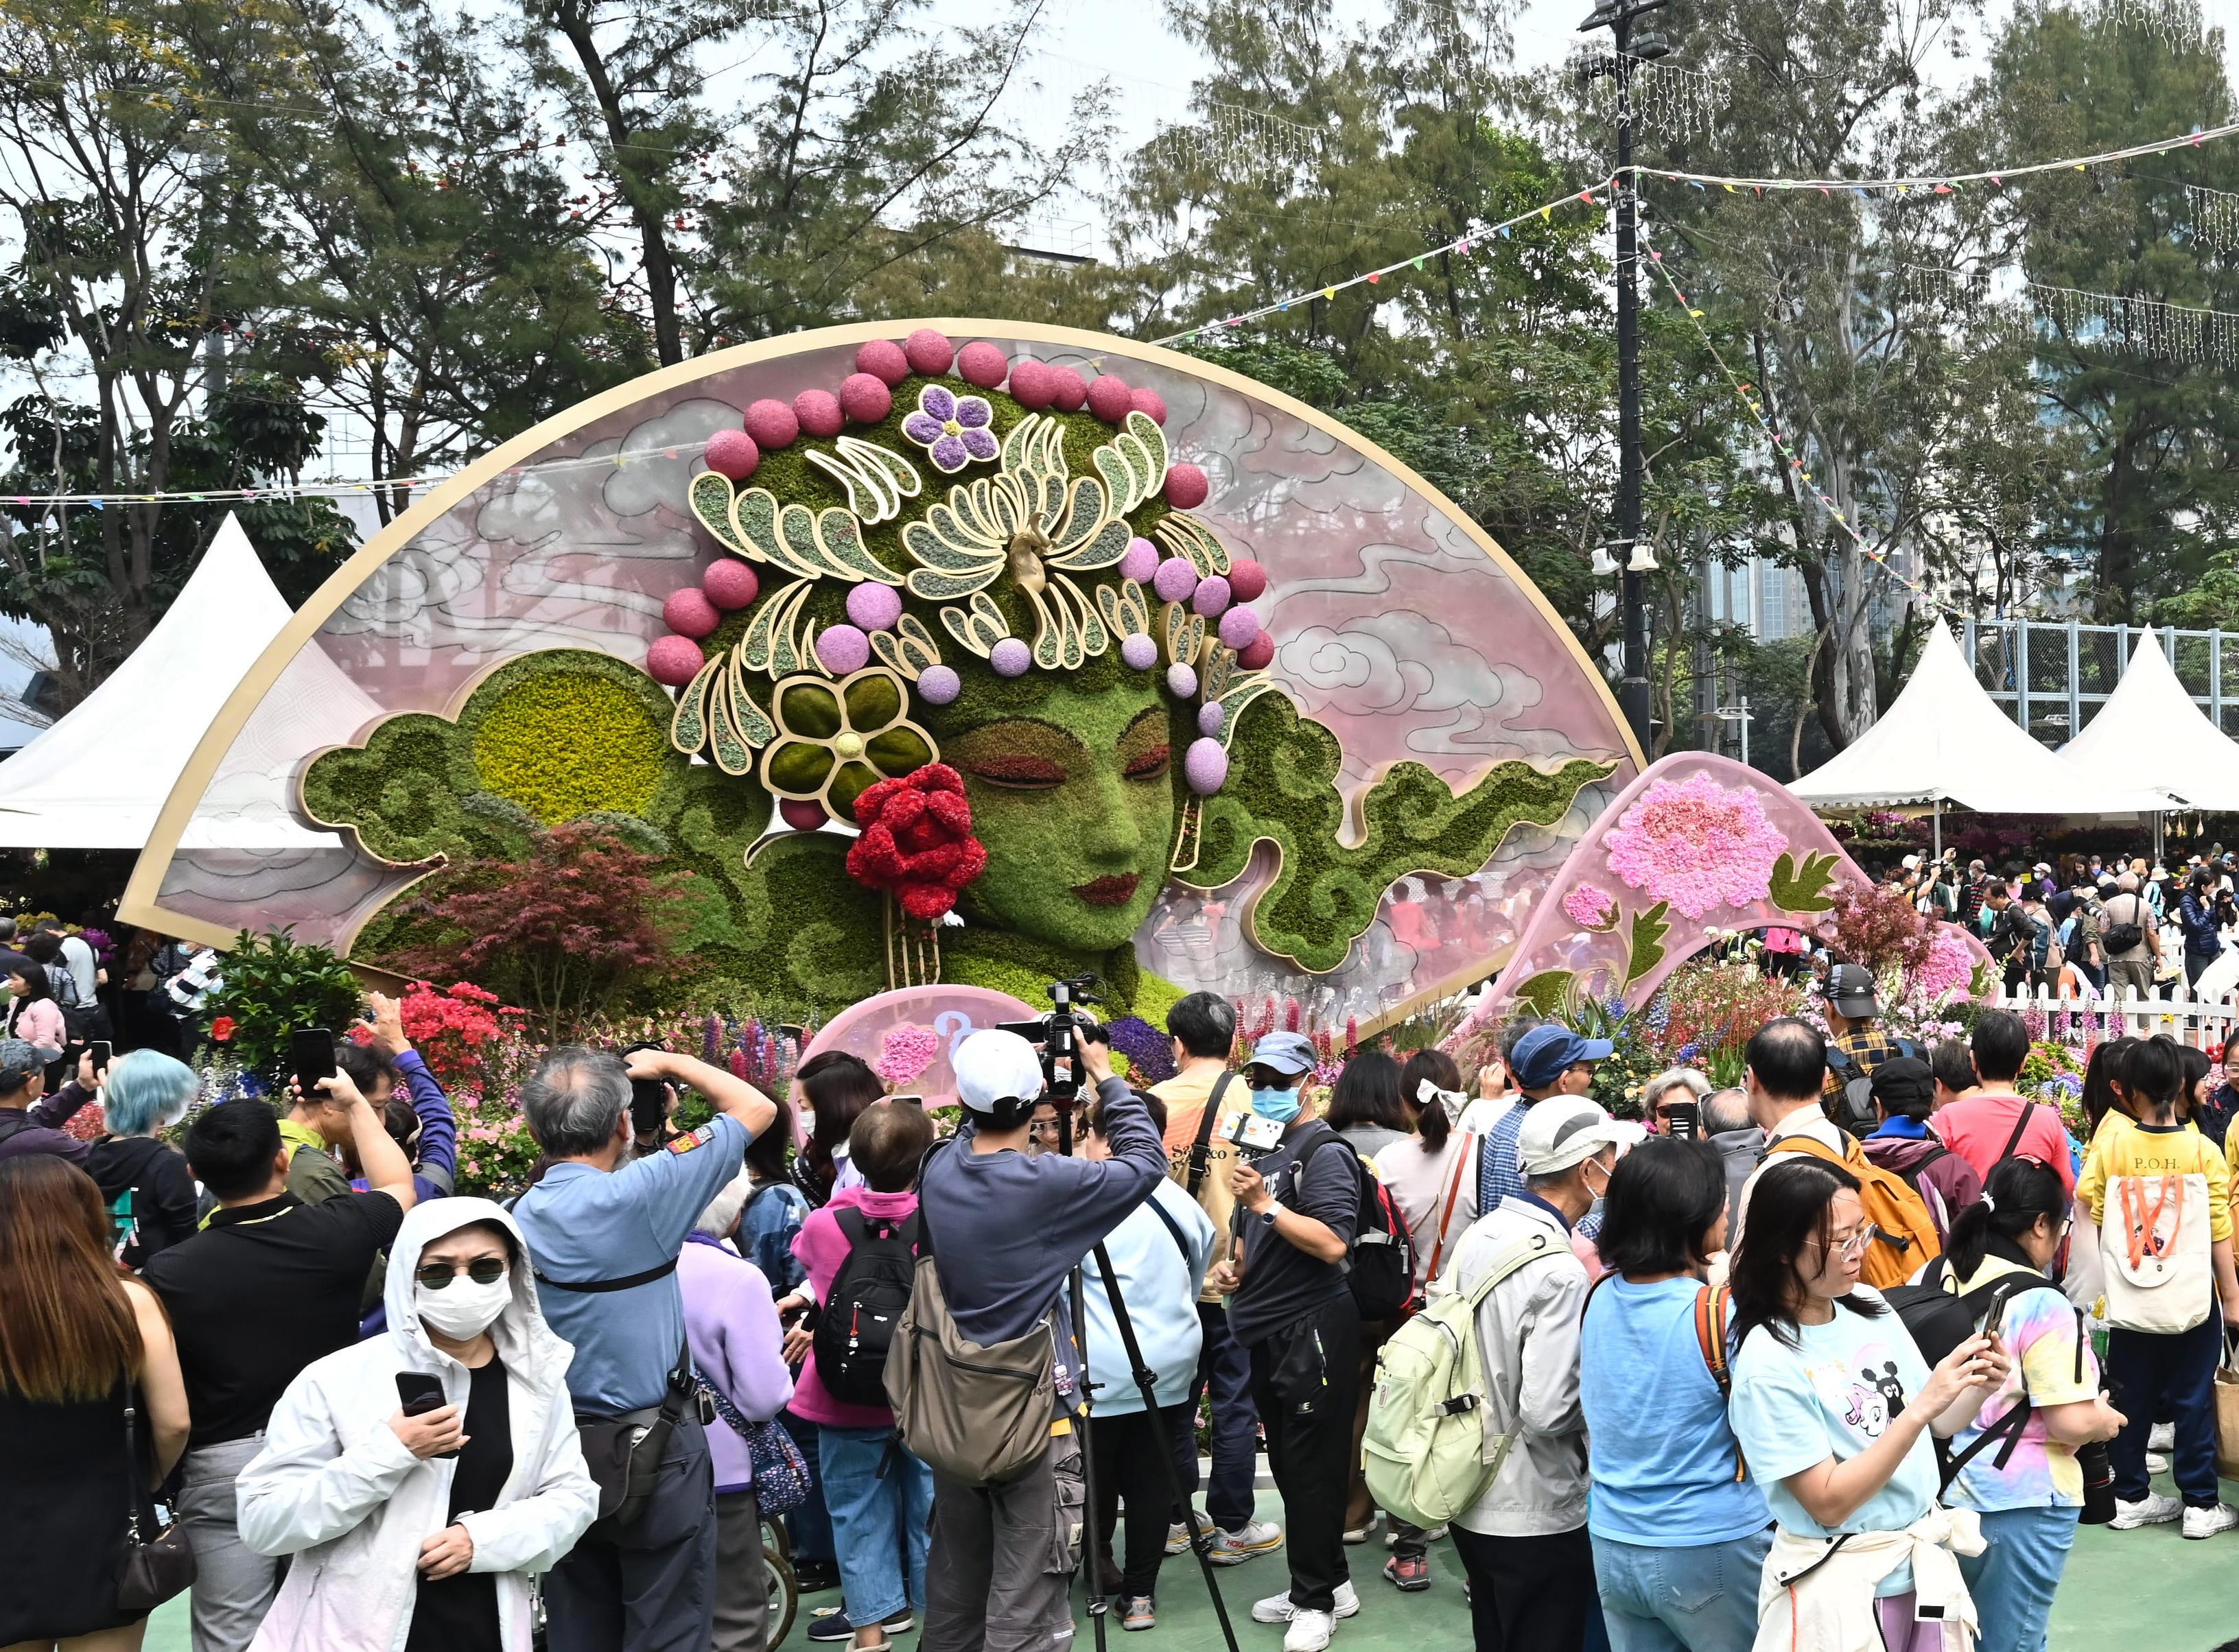 The annual Hong Kong Flower Show extravaganza opened at Victoria Park today (March 15) with some 420 000 flowers on display, including about 40 000 angelonias as the theme flower. The Peking Beauty flower plot is inspired by a female character's headdress in Peking opera.
